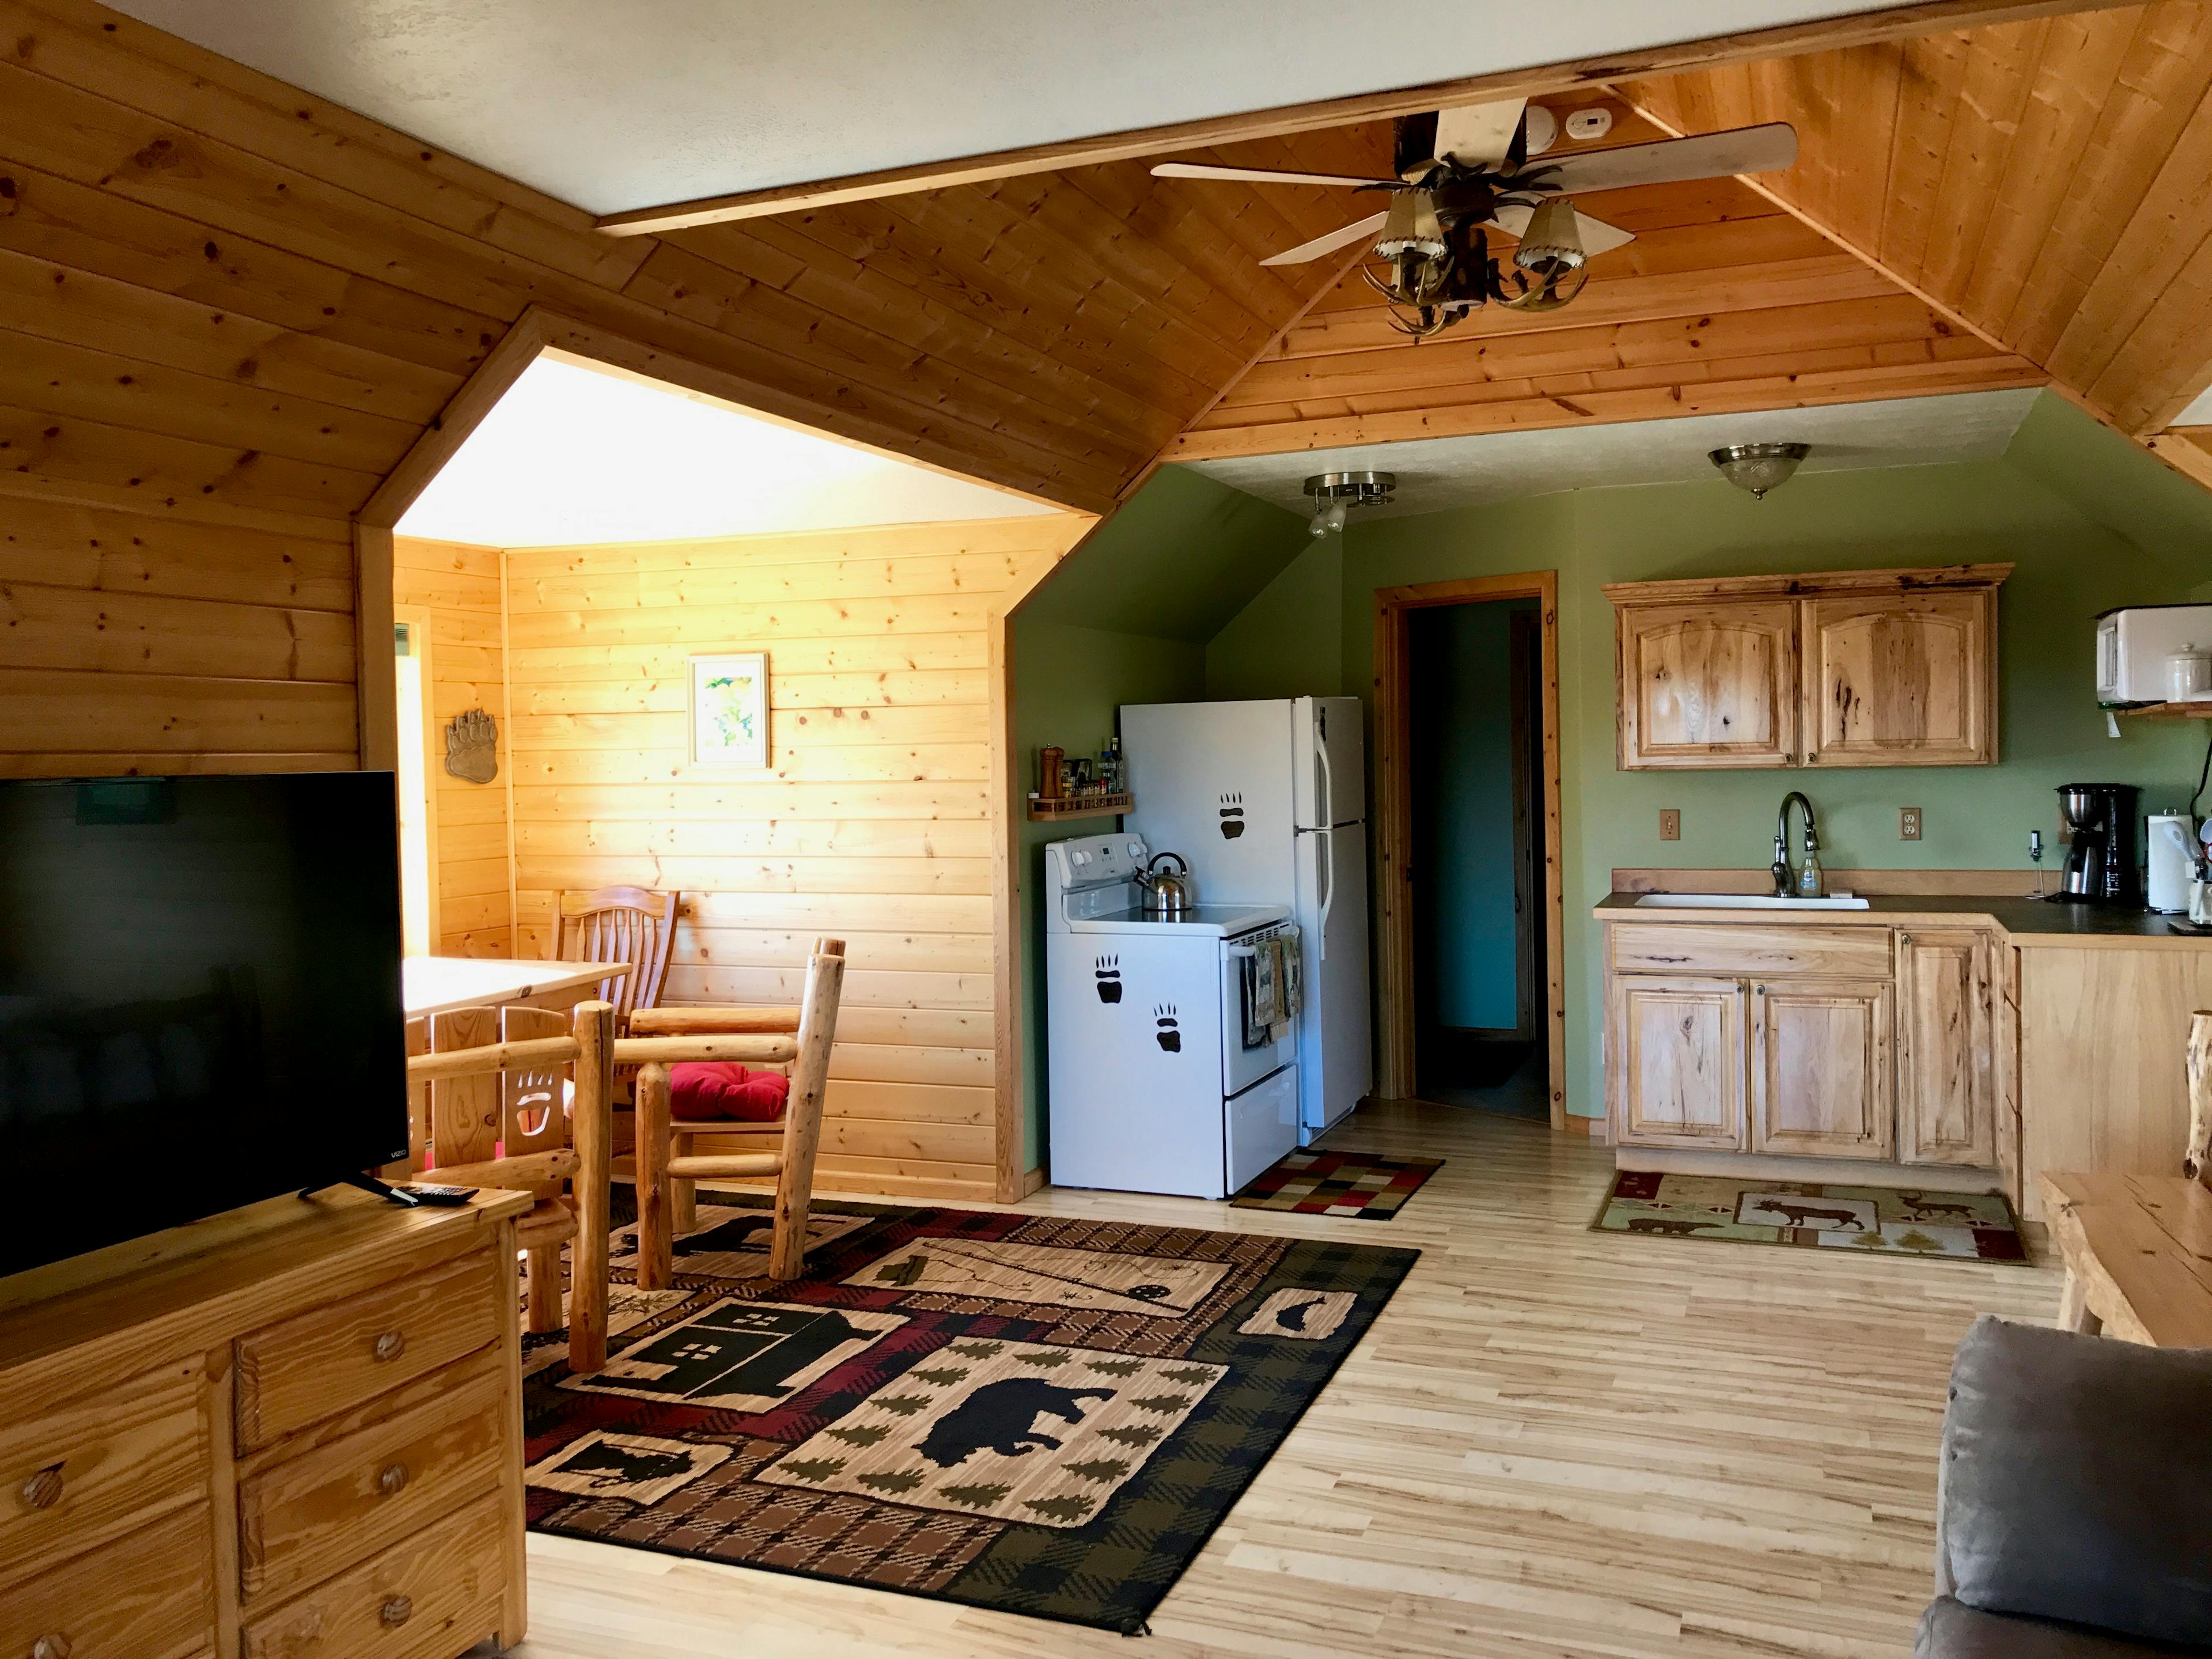 The spacious Bear Paw studio apartment with kitchen area, dining area, bureau with flat-screen TV, and ceiling fan